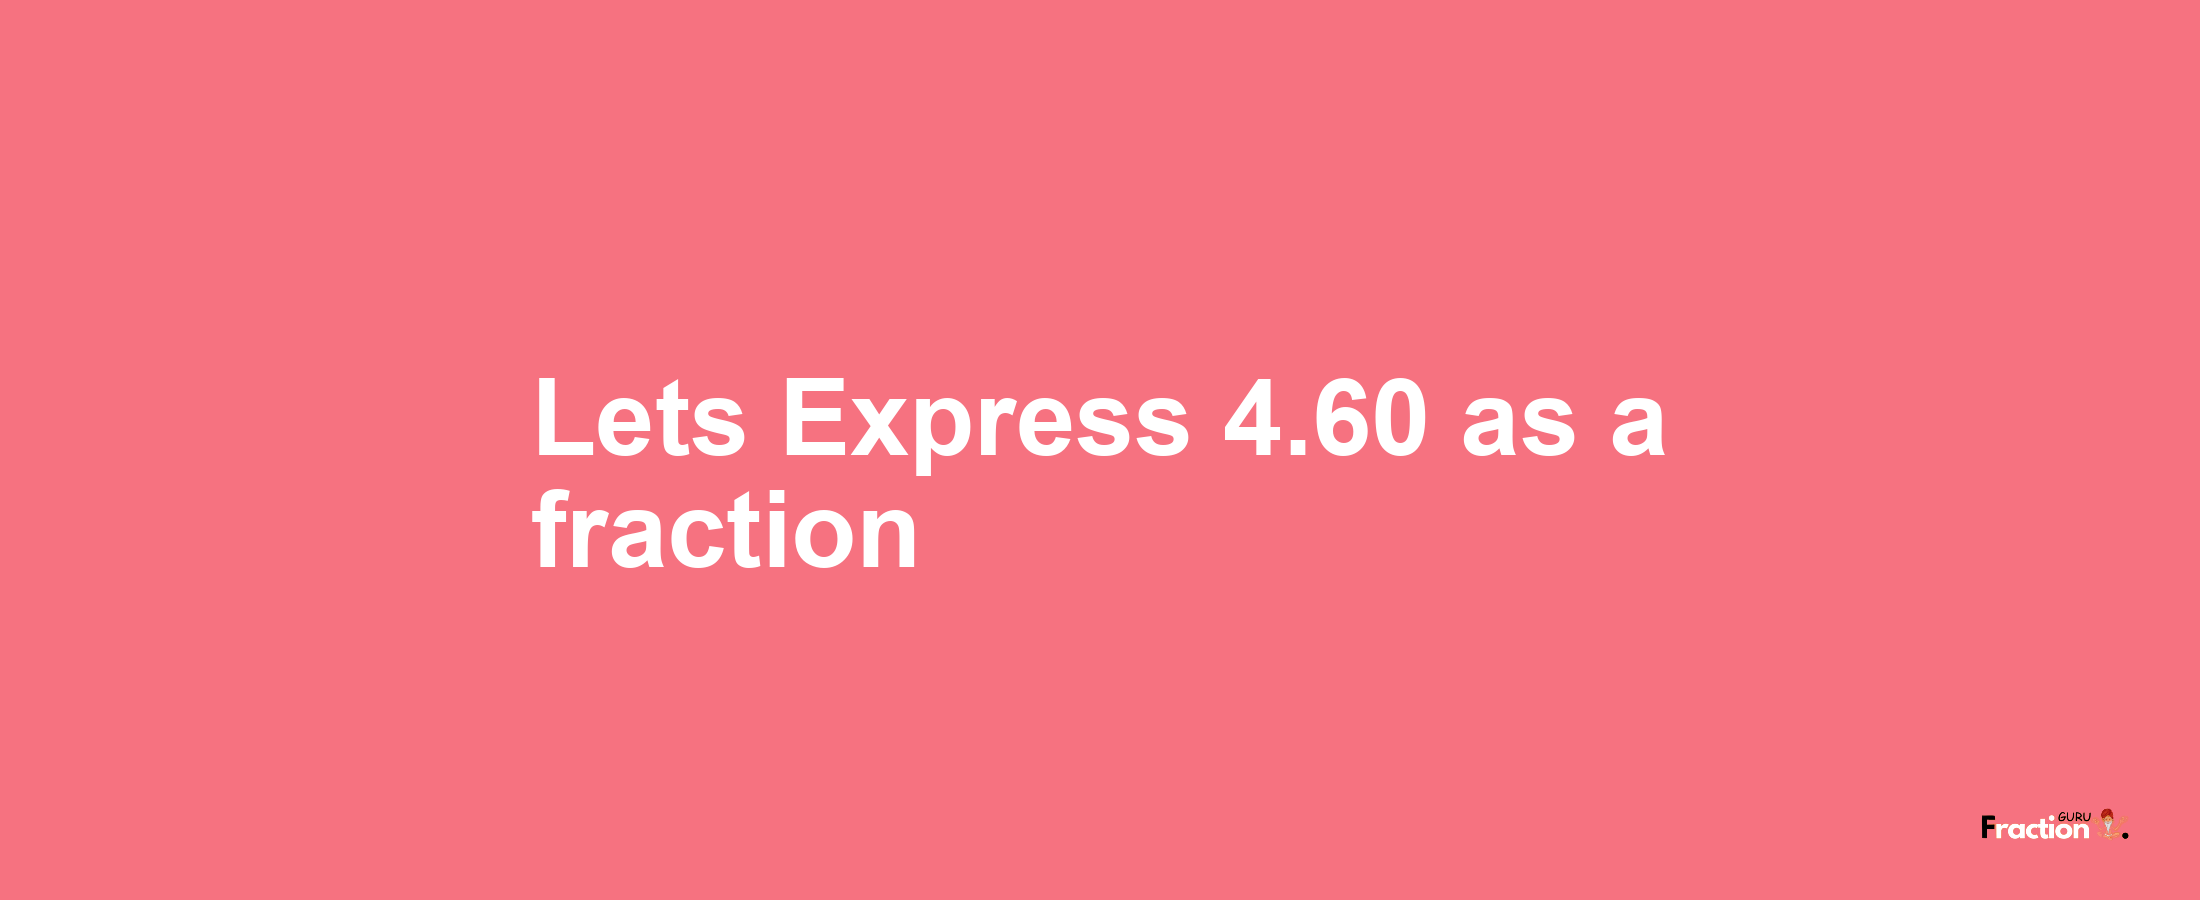 Lets Express 4.60 as afraction